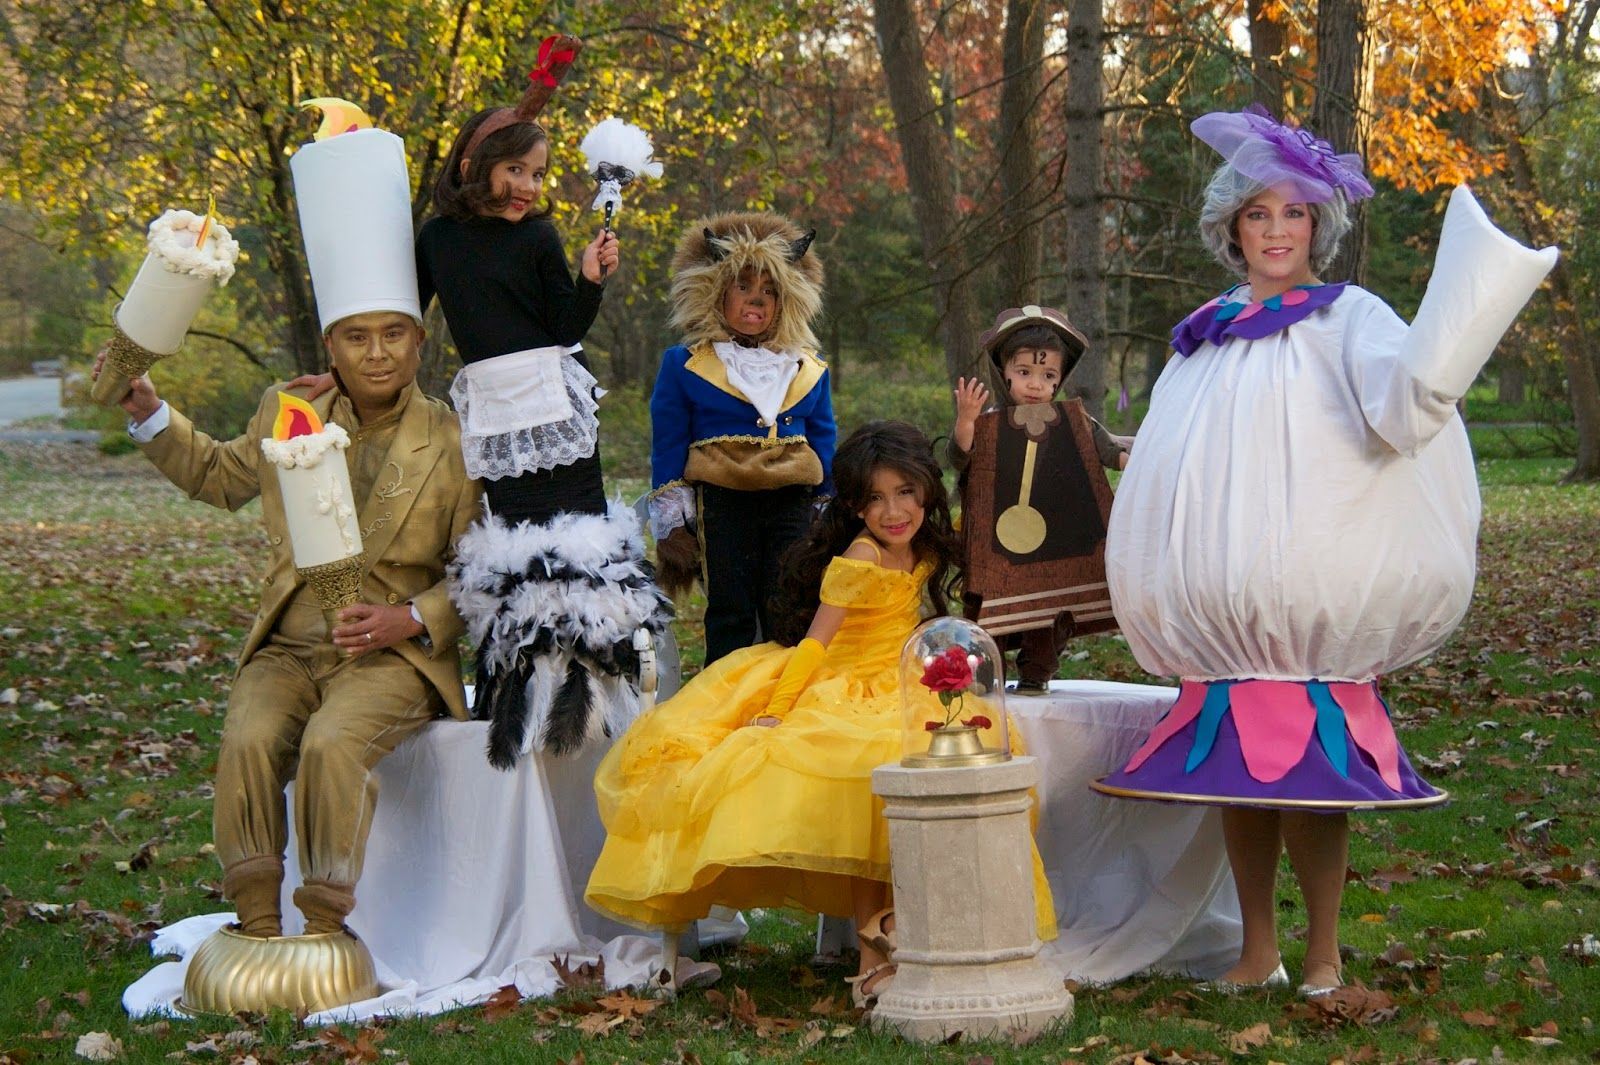 19 beauty And The Beast costume ideas